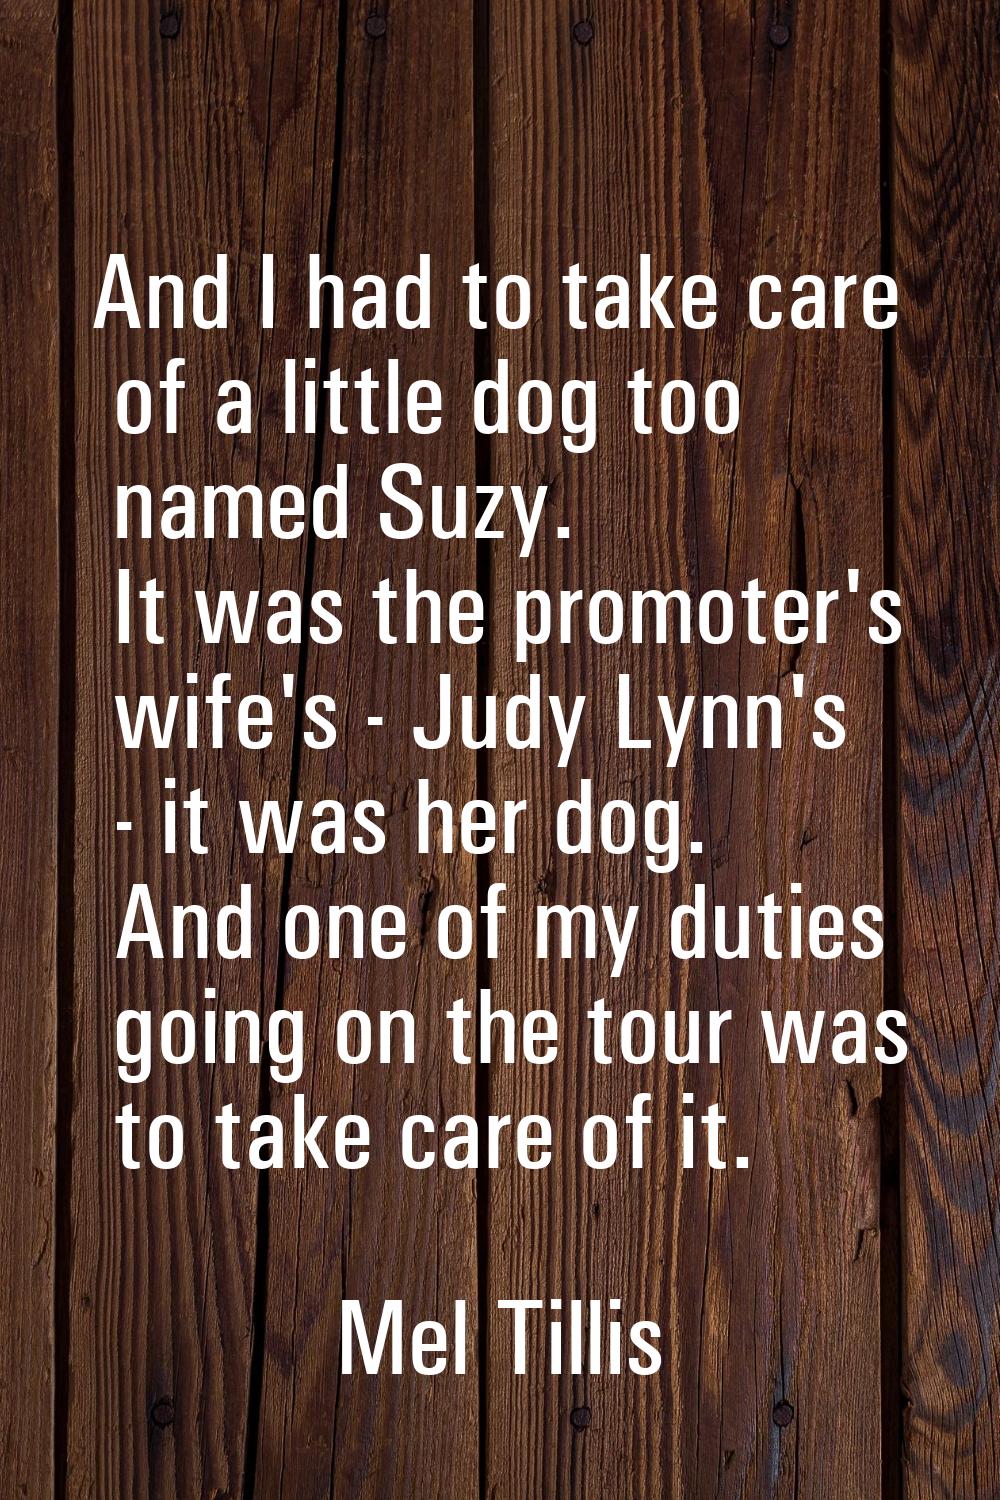 And I had to take care of a little dog too named Suzy. It was the promoter's wife's - Judy Lynn's -